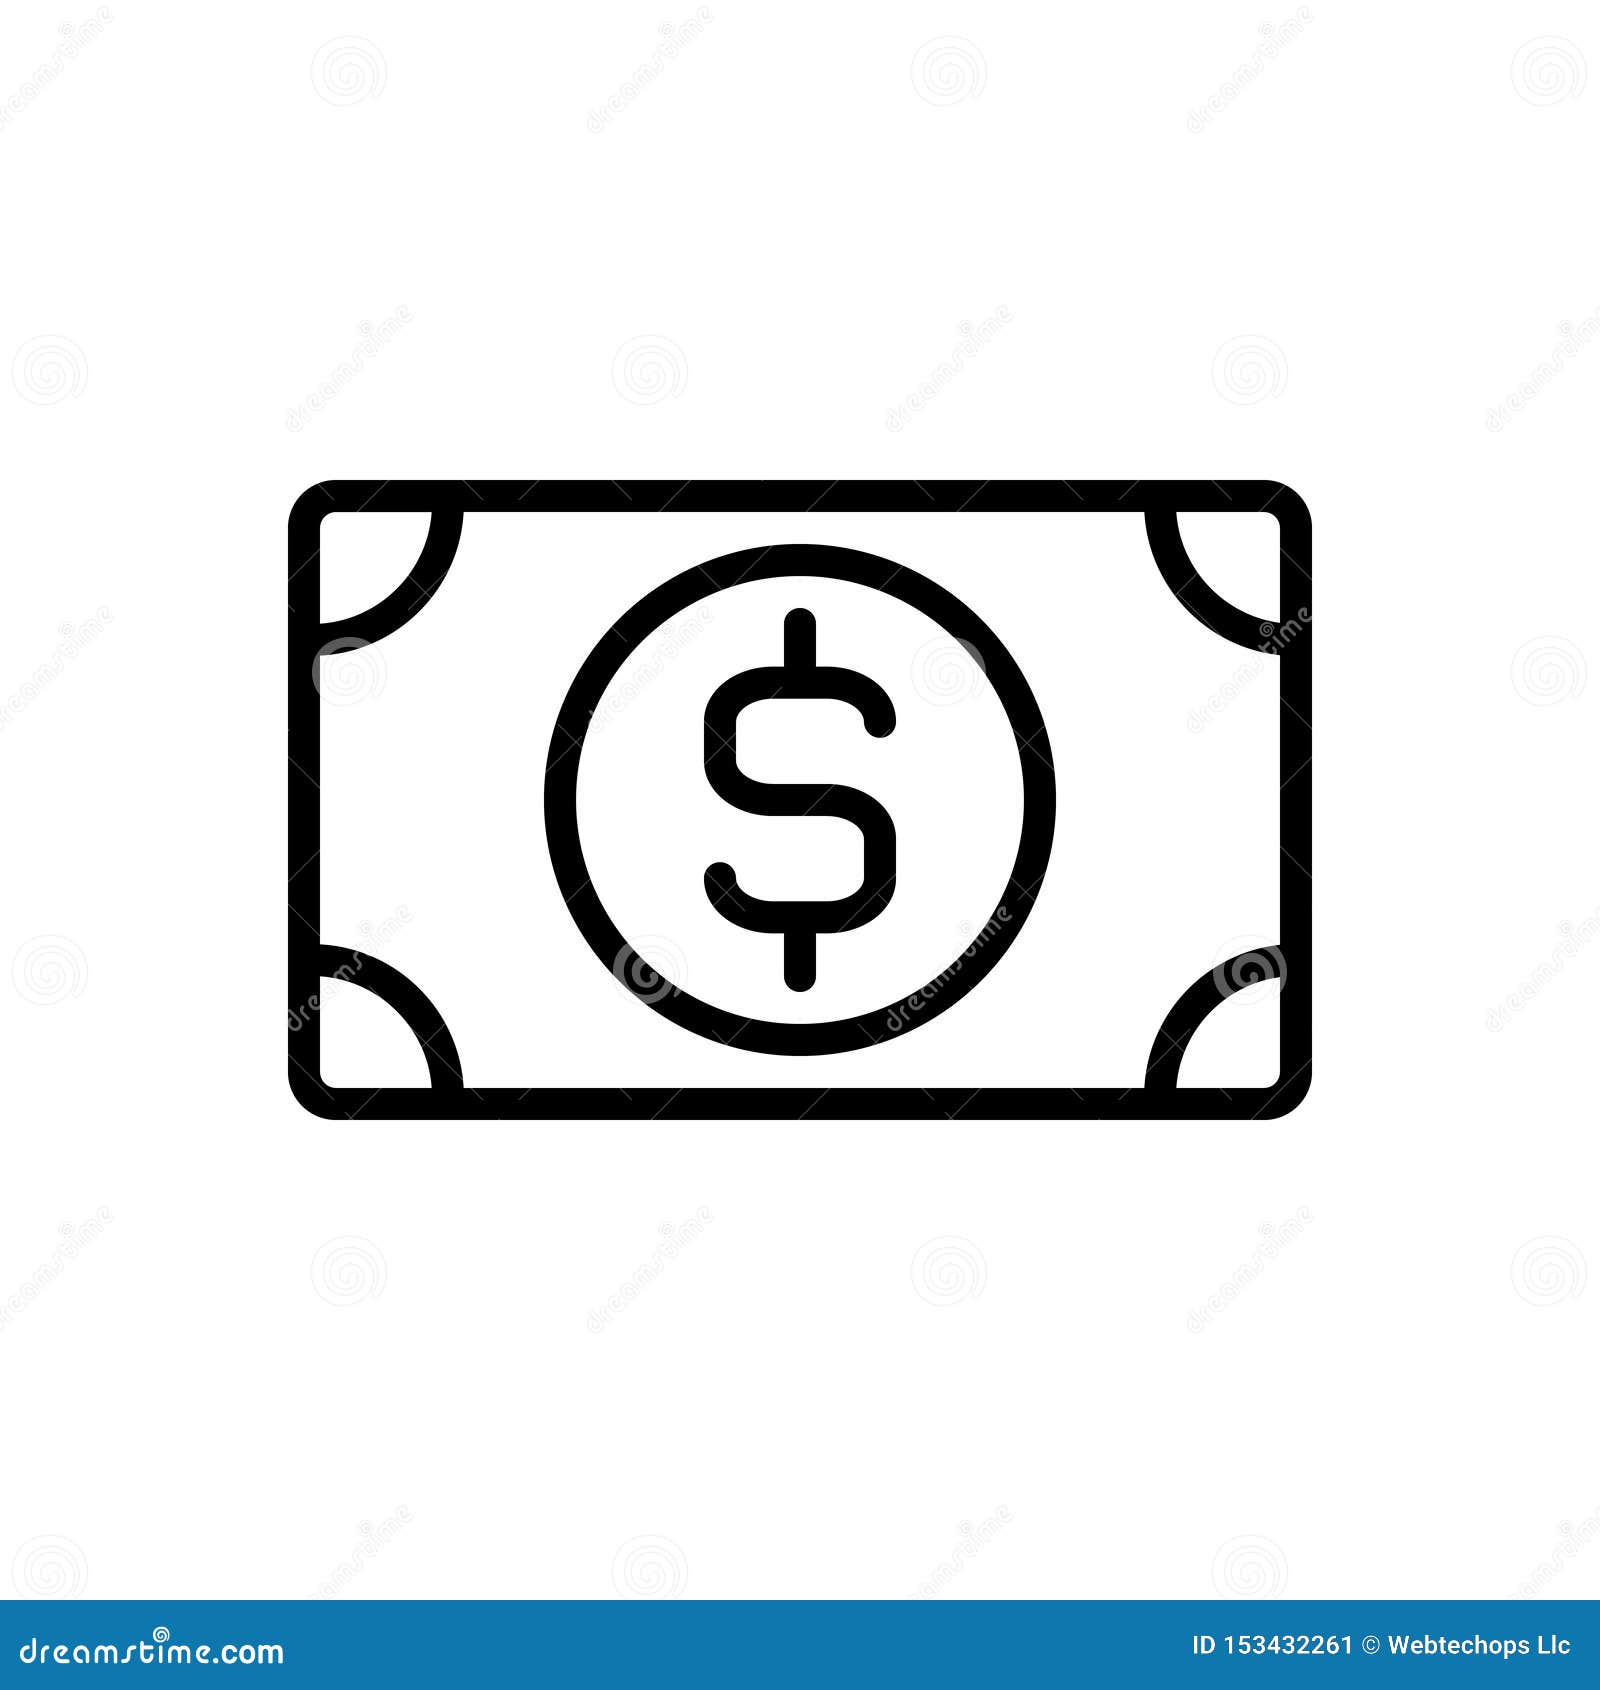 black line icon for wealth, money and riches